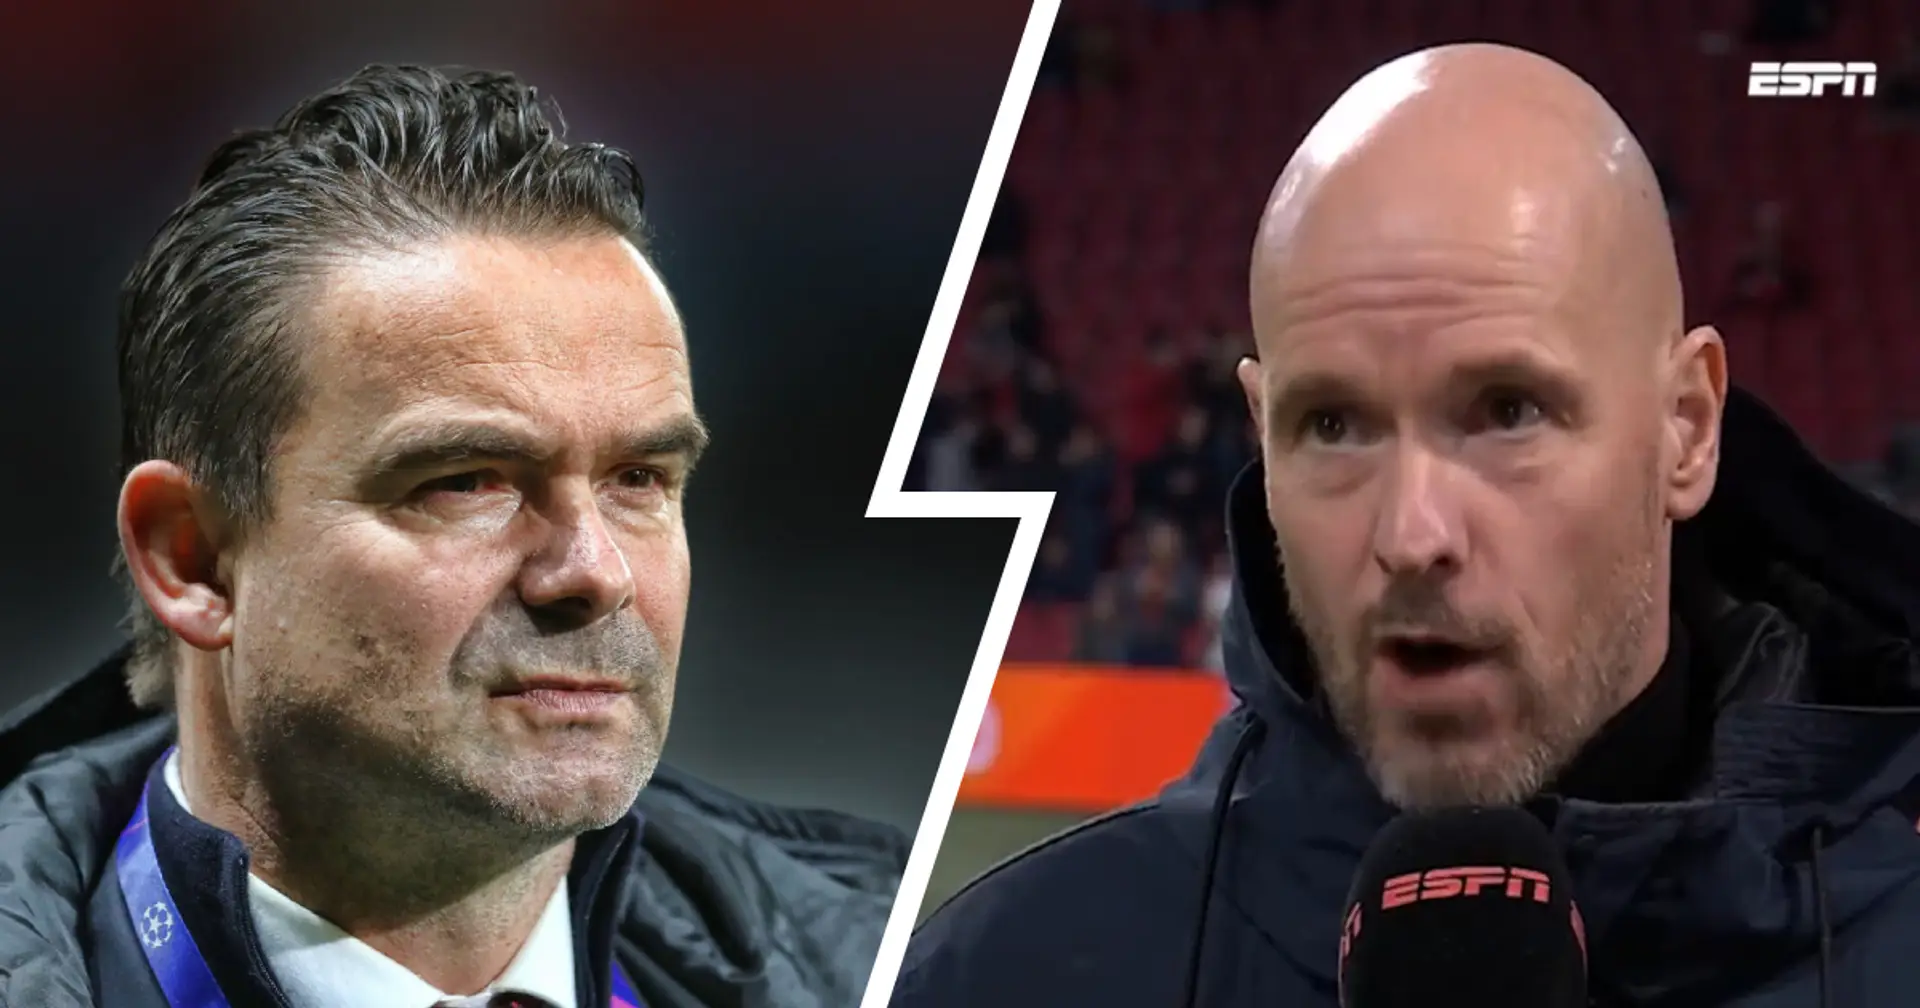 'This is disastrous for the victims, for the women': Erik Ten Hag breaks silence on Marc Overmars controversy